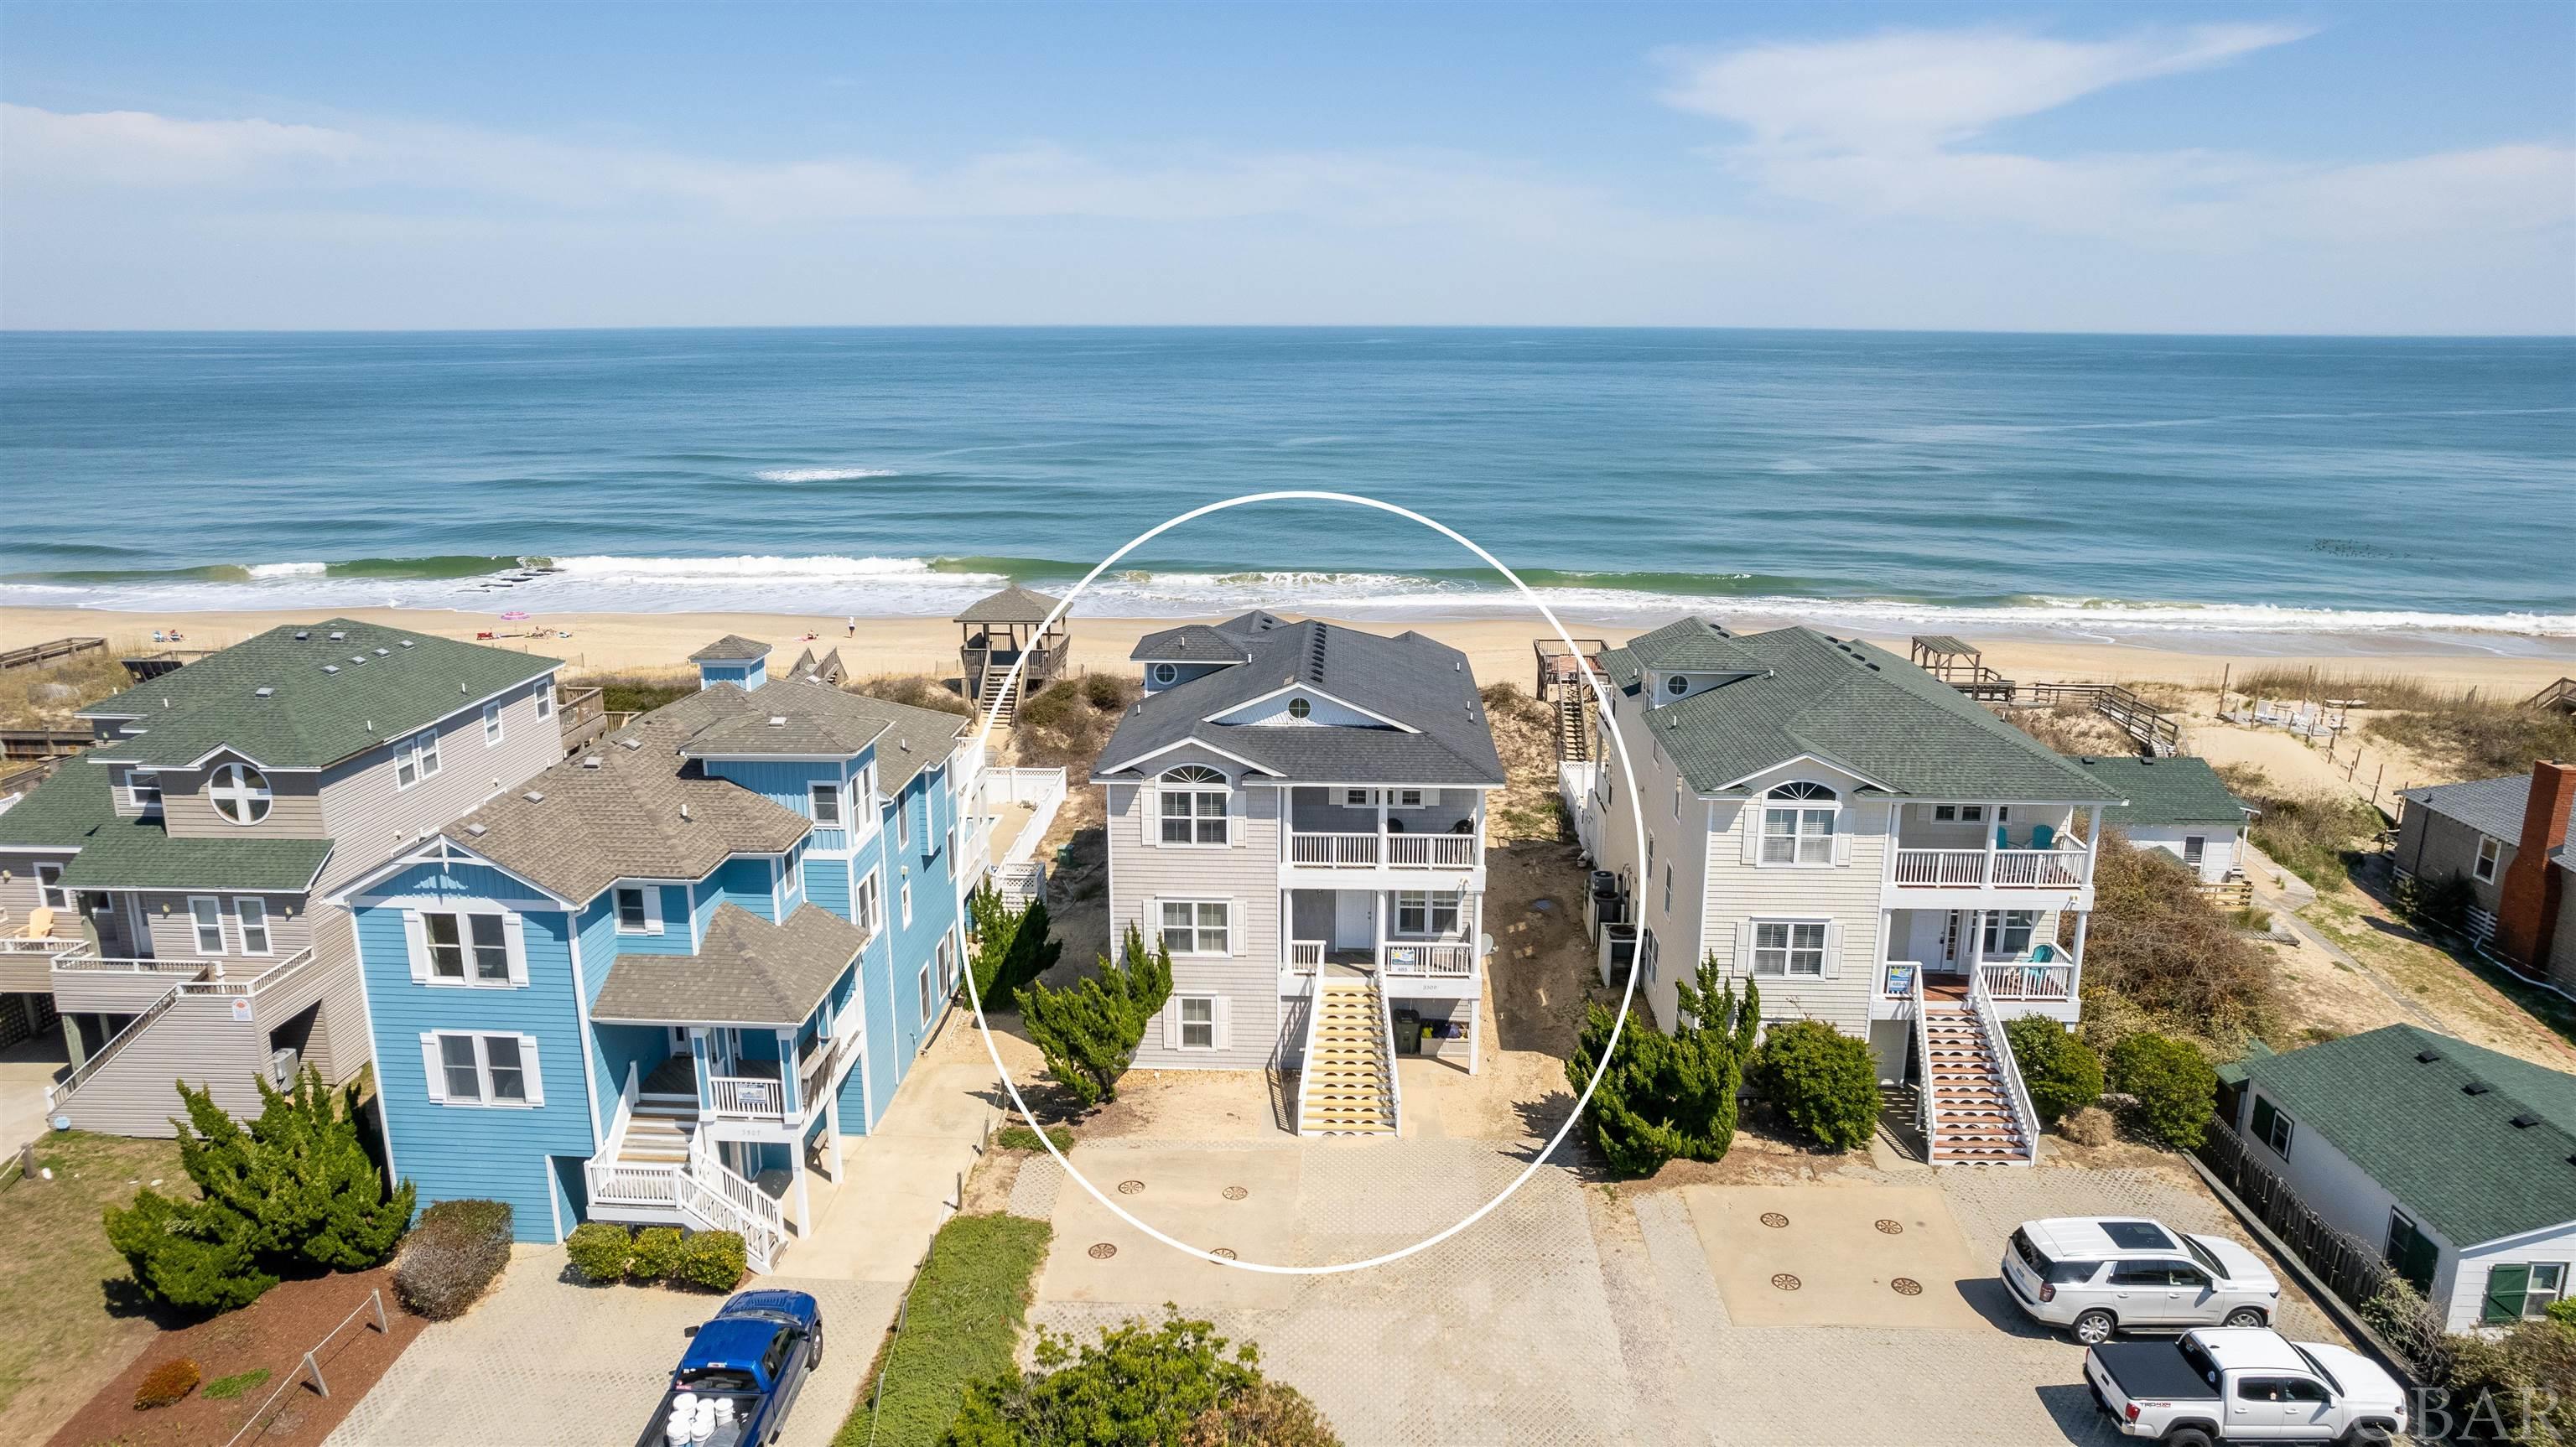 *$25,000 FURNITURE CREDIT AT CLOSING* Incredible investment opportunity to own a 10 bedroom Oceanfront in the heart of Nags Head w/ over 10% GRR in 2023!  Almost every room in this home features a stunning Ocean View, and the top level primary suite has its own private balcony with views of Jockey Ridge State Park.  You cannot ask for a better location in Nags Head!  The reverse floor plan allows you to soak in the Ocean Views while socializing between the spacious open plan Kitchen, Dining, and Living Room area.  The top level primary suite is a great escape offering a jetted tub and private balcony overlooking Jockey's Ridge State Park with incredible sunsets.  There is plenty of room to spread out and entertain as the property also offers a ship's watch with card table off the living area, along with a mid level Den and Ocean View Game Room.  Yes, you read that correctly!  A mid level Ocean View Game Room ... not on the ground level, so you can play AND enjoy the stunning water views at the same time!  A handicap friendly elevator also makes for quick and easy access to each level.  Outside the entertainment options continue with a 12x30 private and heated fiberglass pool, 'kiddie' pool, 8 person hot tub, grill, and private beach walkway with a large sun deck to enjoy the views from sunrise to sunset!  This property is ideally located around MP 11.5 and close to several Outer Banks classics including Tortuga's Lie, Bonnett Street beach access, Dowdy Park, Lucky 12 Tavern, the Nags Head Pier, Surfin' Spoon, and Jockey's Ridge!  Not to mention, over $335,000 in Gross Rental Income for 2023, a NEWER Roof ('17), and a NEW Dune Deck ('23), 2 NEW Heat Pumps and Air Handlers ('23), and NEW Kitchen Counters and Sink in Nov. '23!  The 'Salt Palace' is turn key and ready to be your new OBX income producing property in 2024!